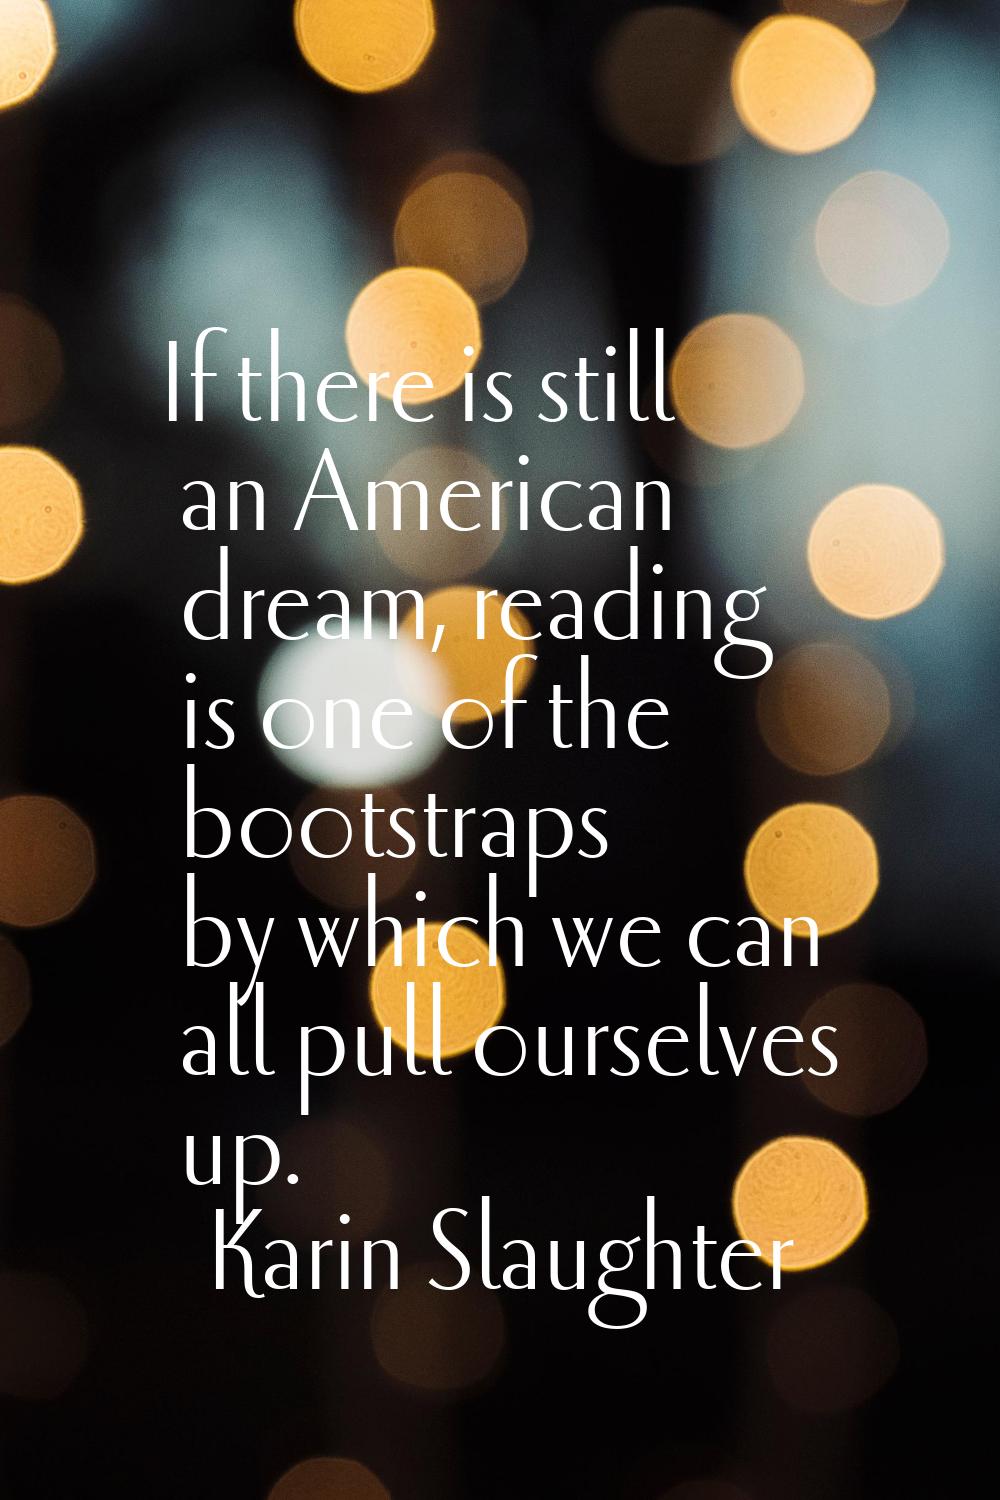 If there is still an American dream, reading is one of the bootstraps by which we can all pull ours